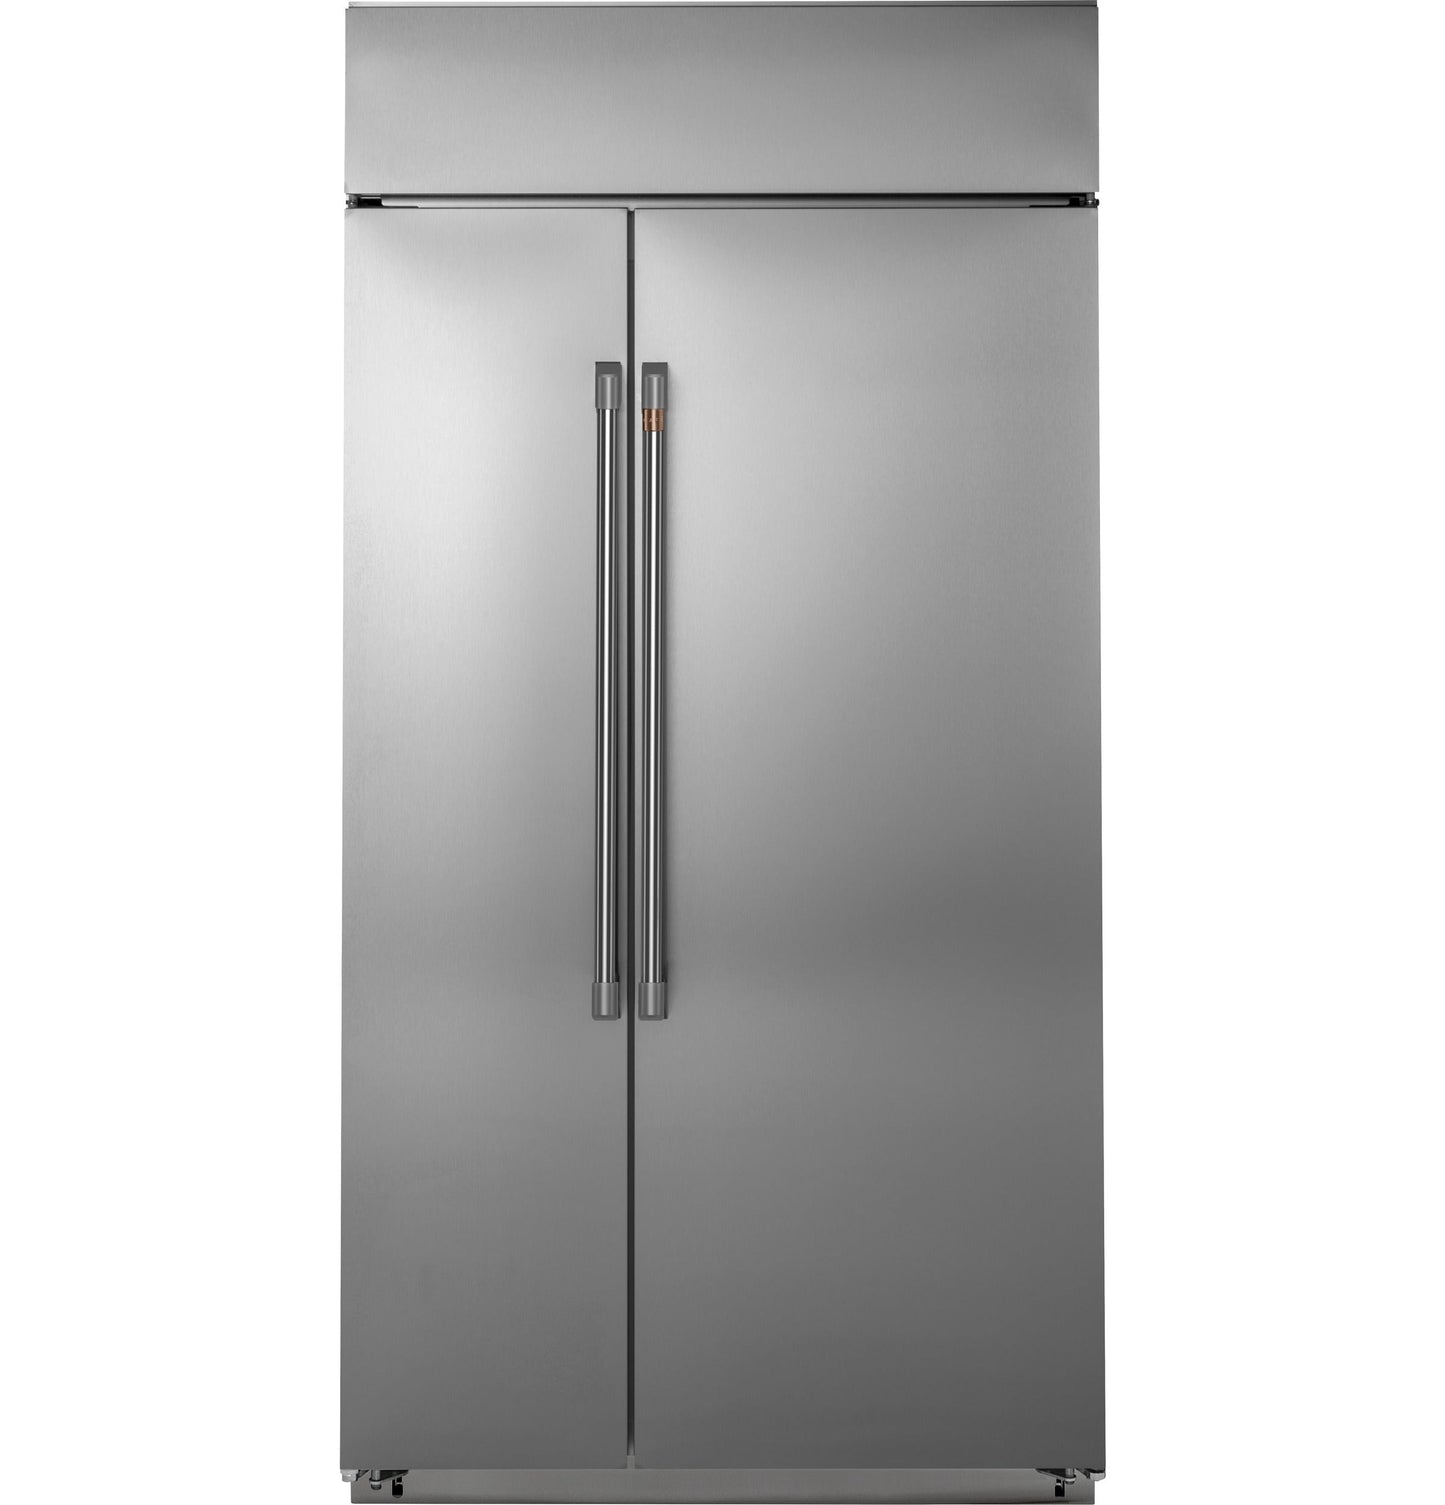 Café 42" Built-In Side-by-Side Refrigerator Stainless Steel - CSB42WP2NS1